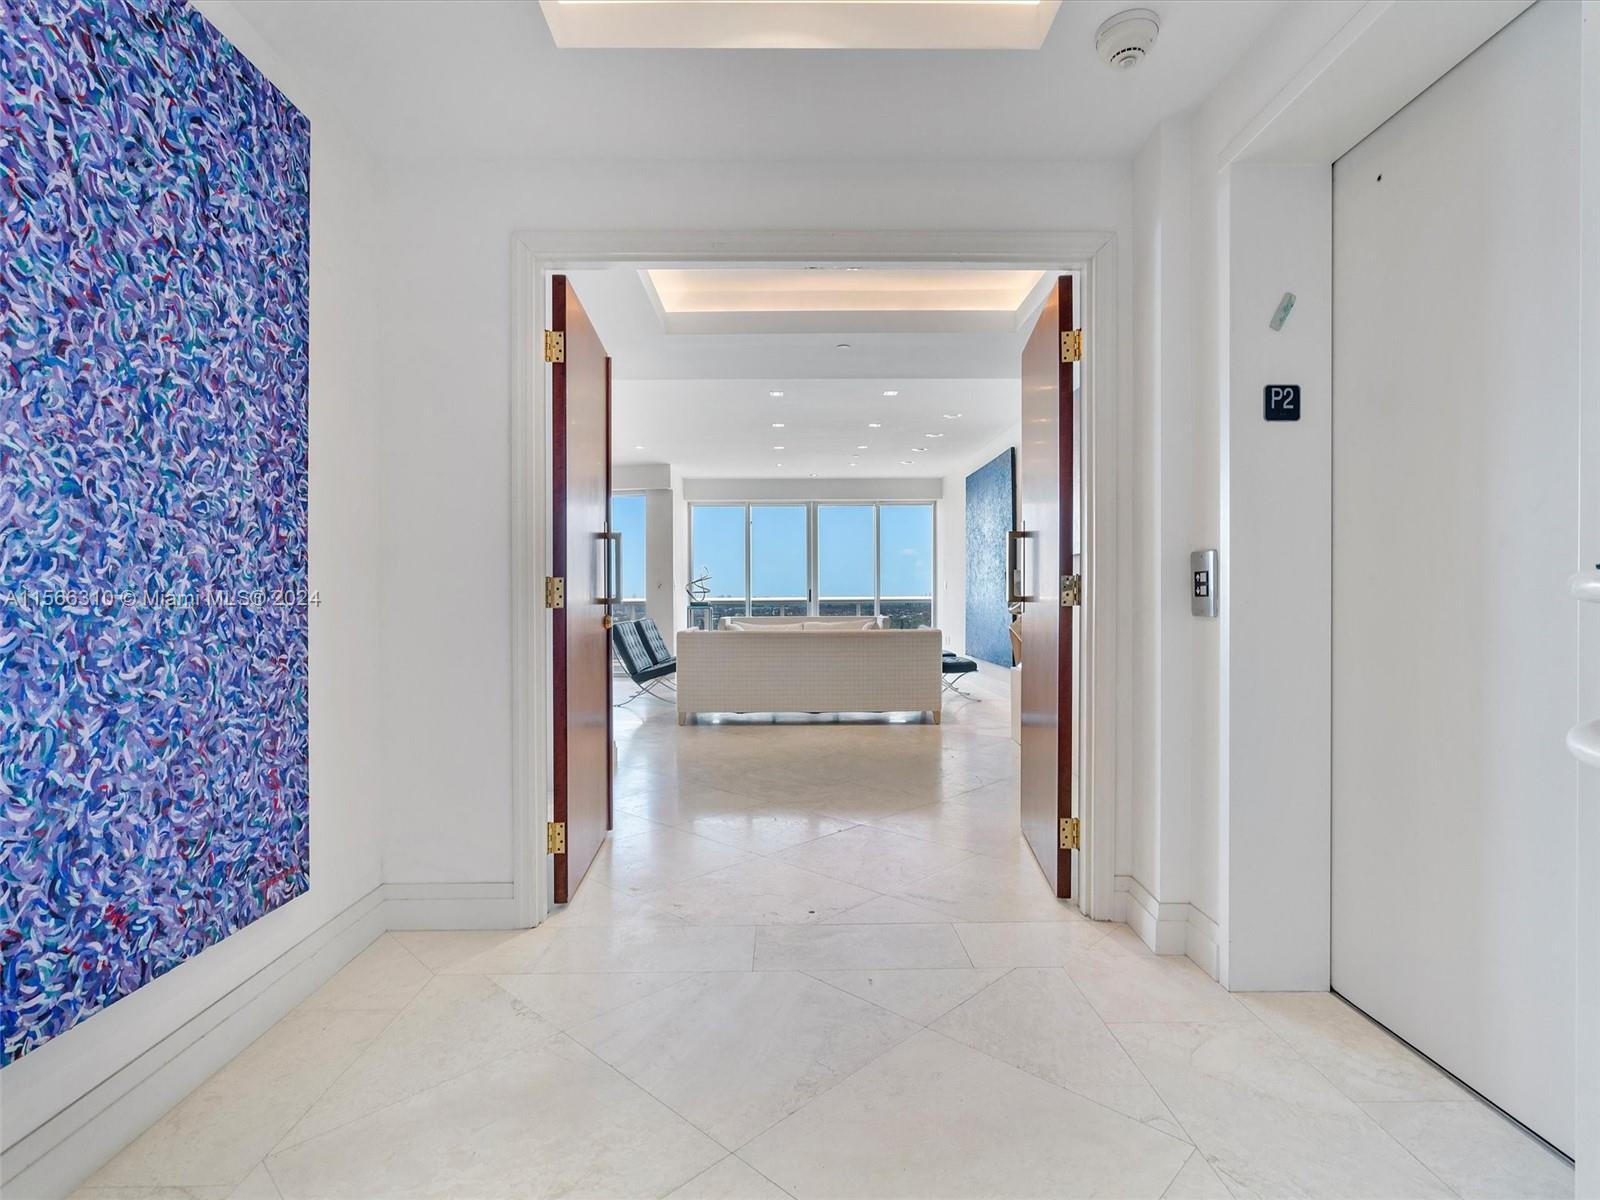 Experience unparalleled luxury at Bal Harbour's Majestic Tower PH206. This oceanfront penthouse boas